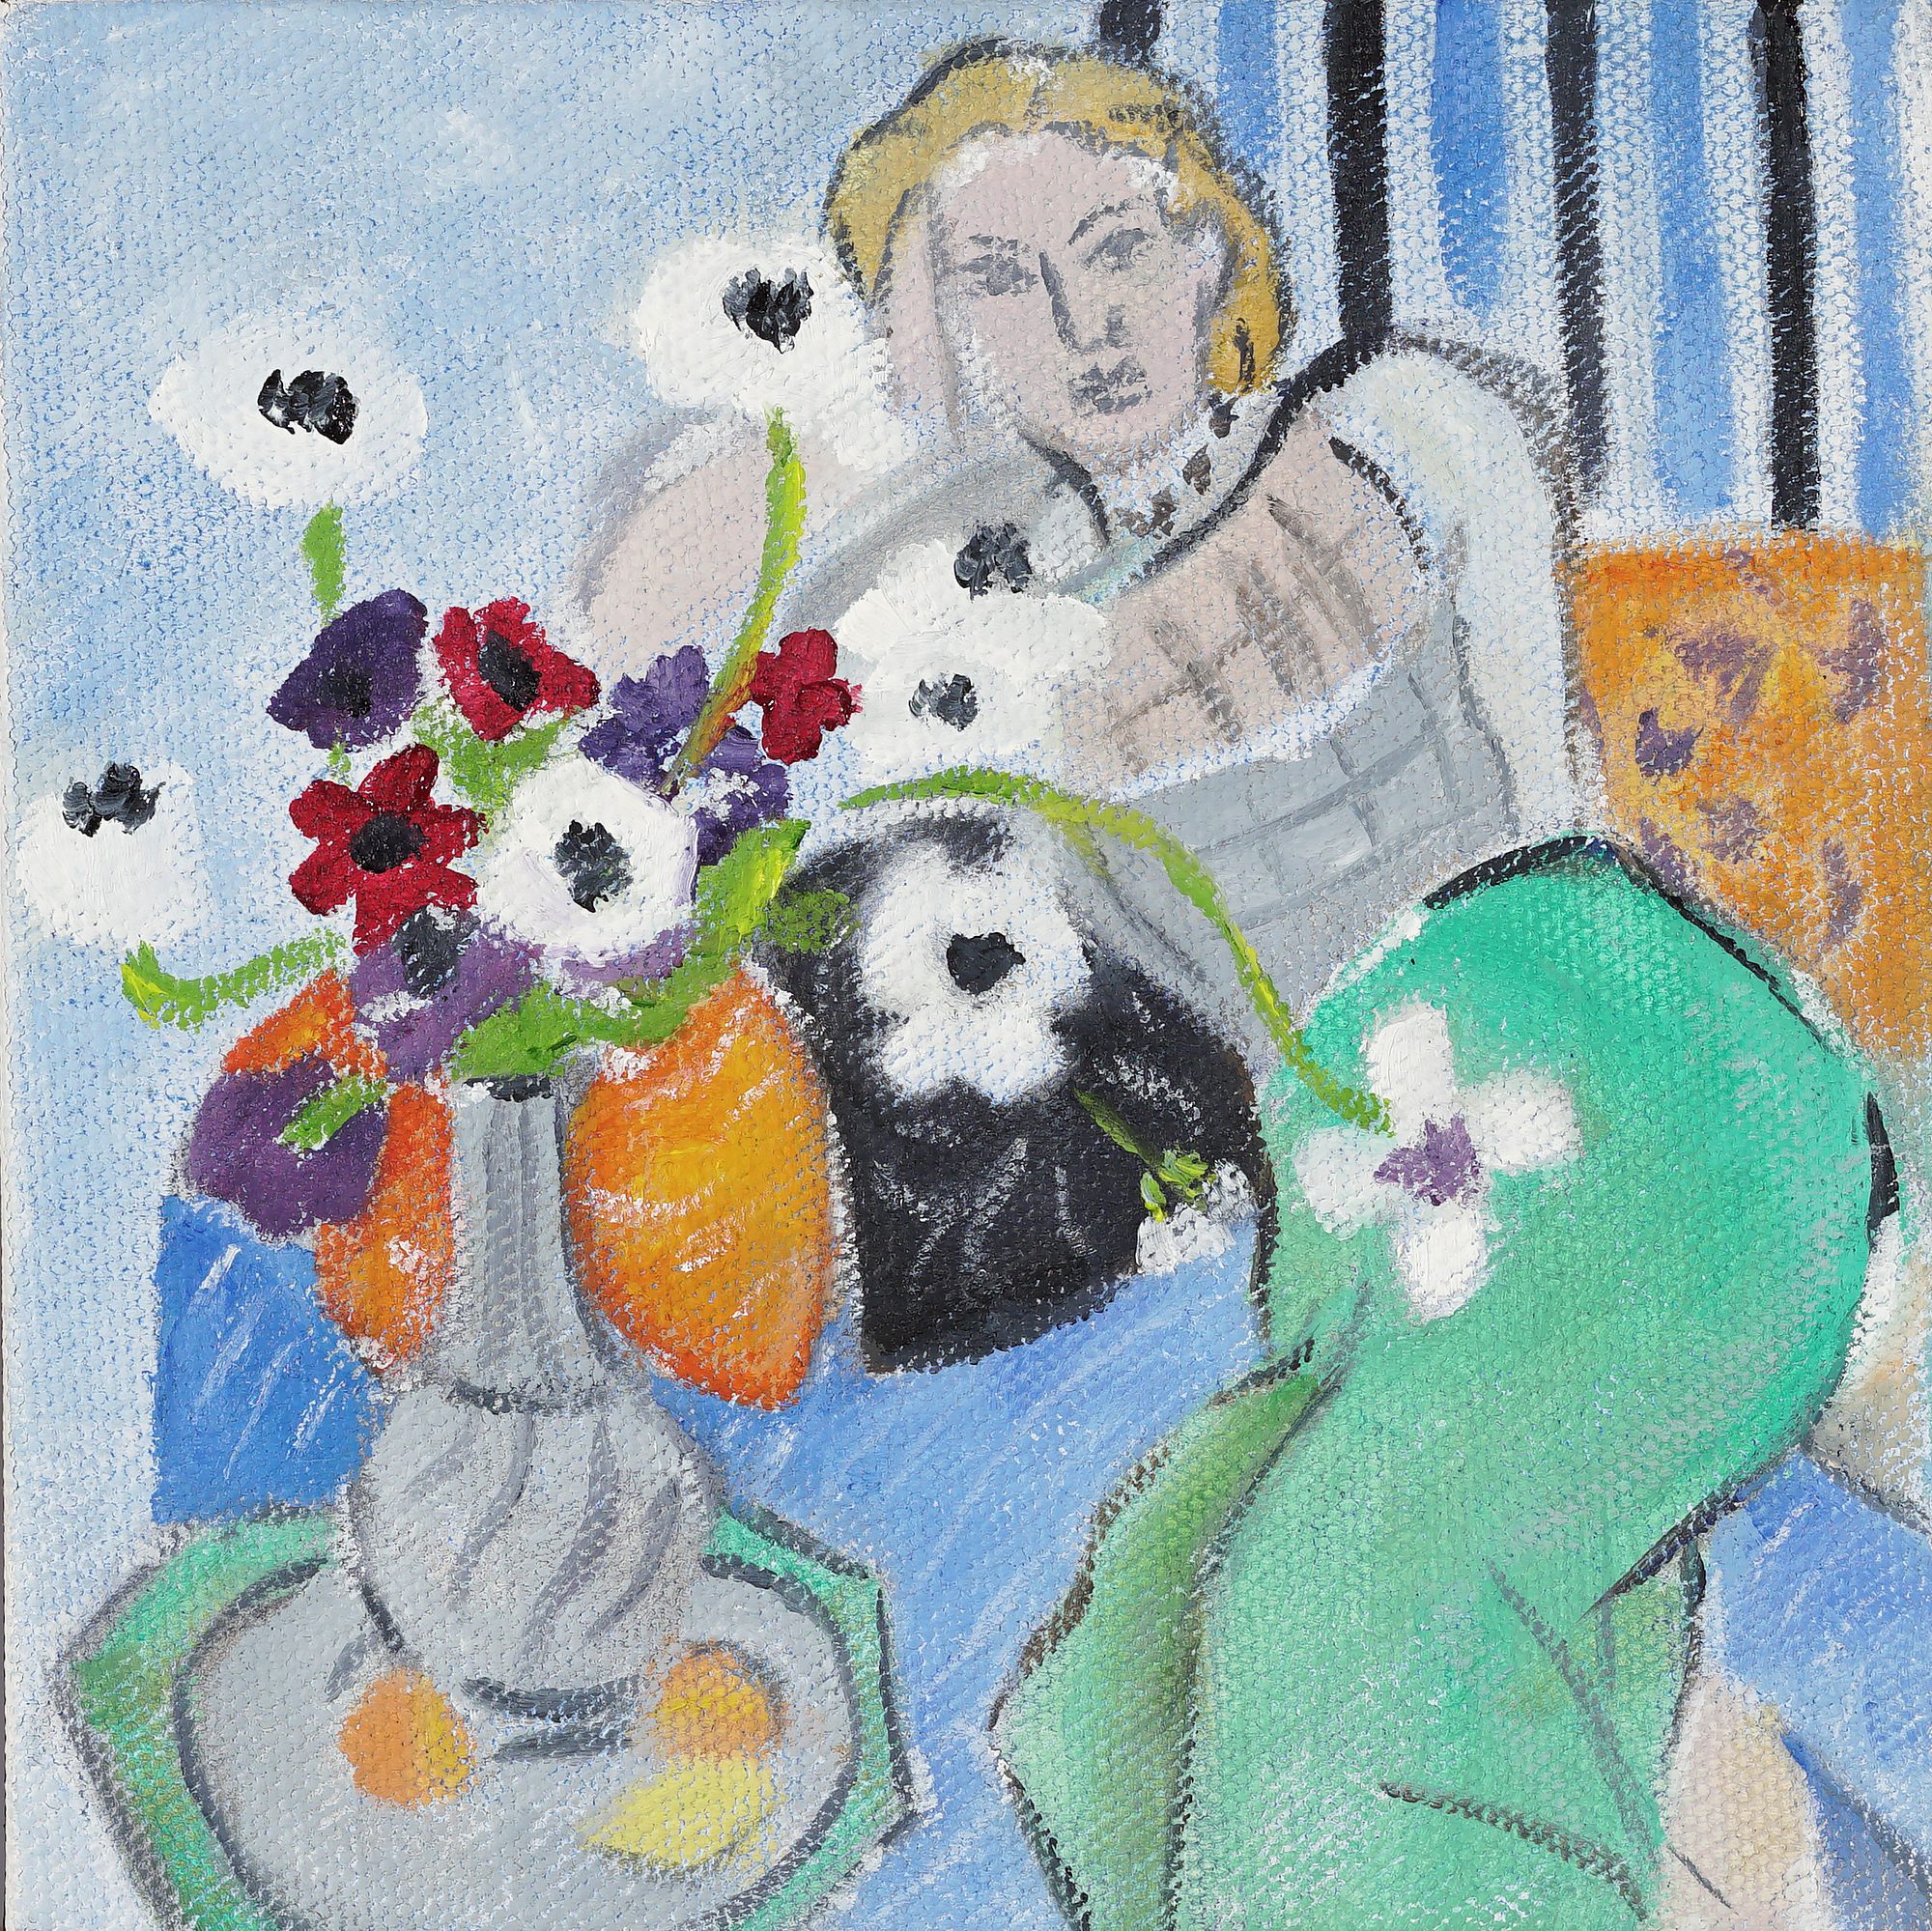 Cindy Sugg, Reclining Figure with White Flowers, after Henry Matisse